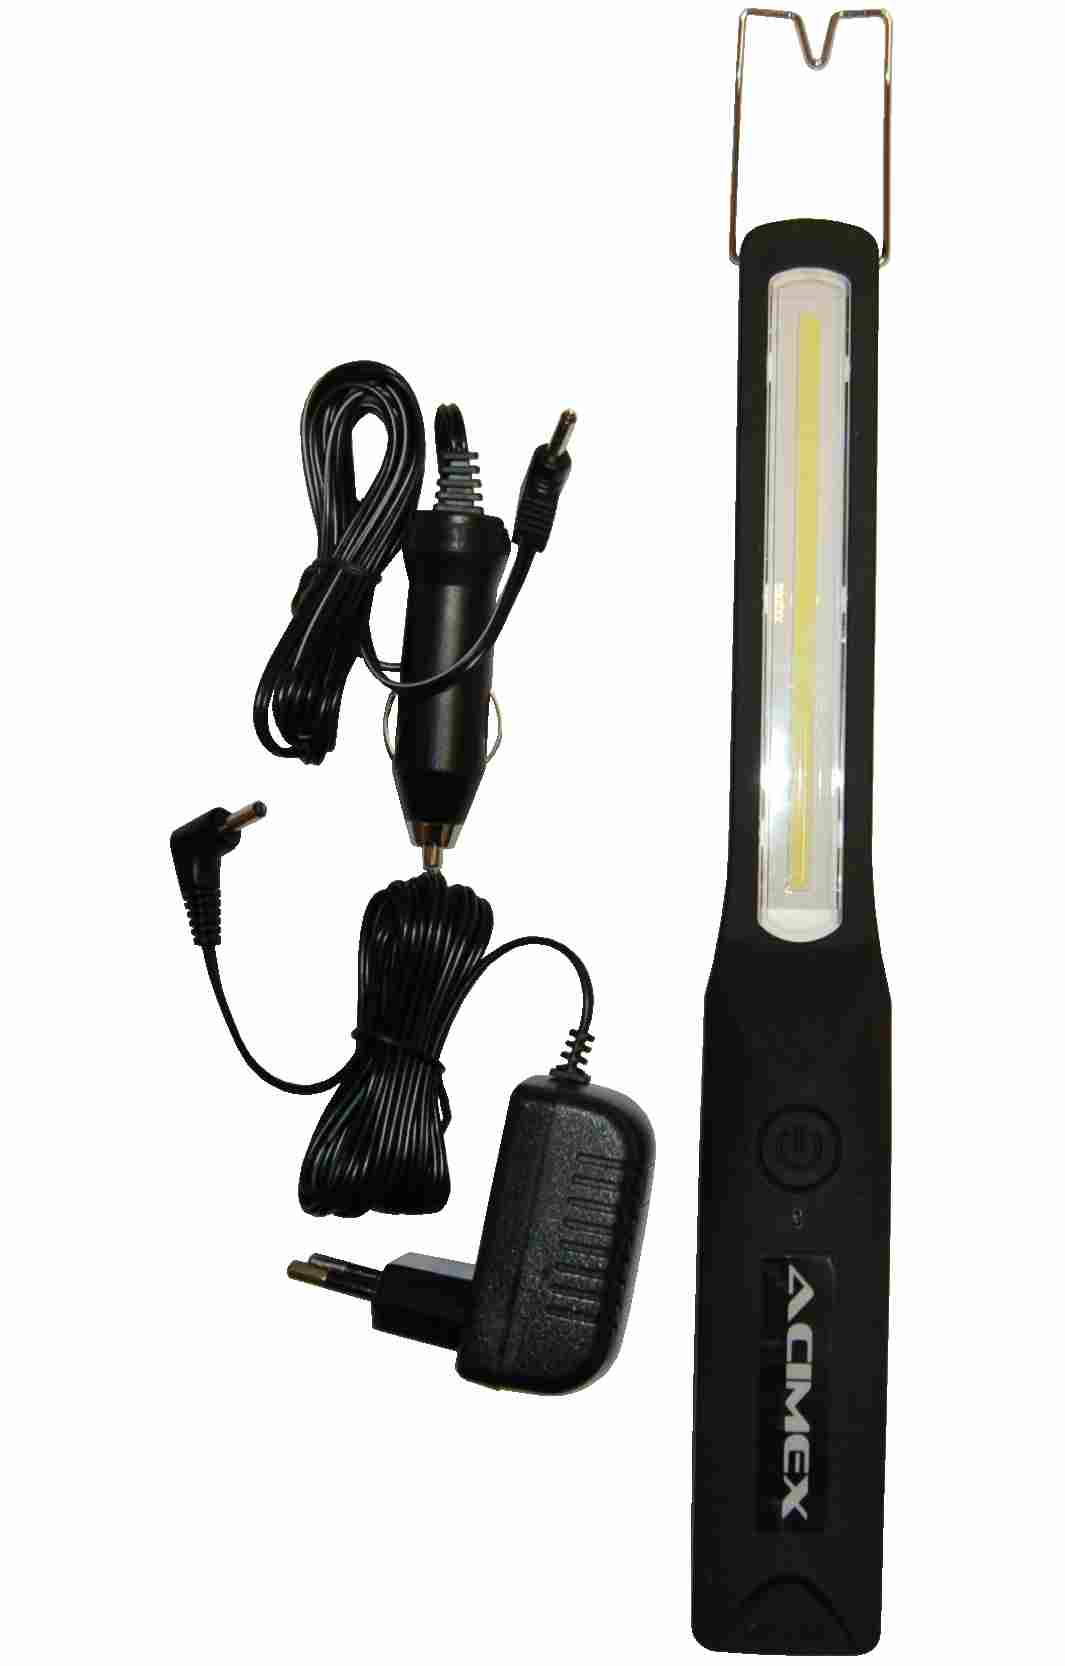 Baladeuse LED rechargeable